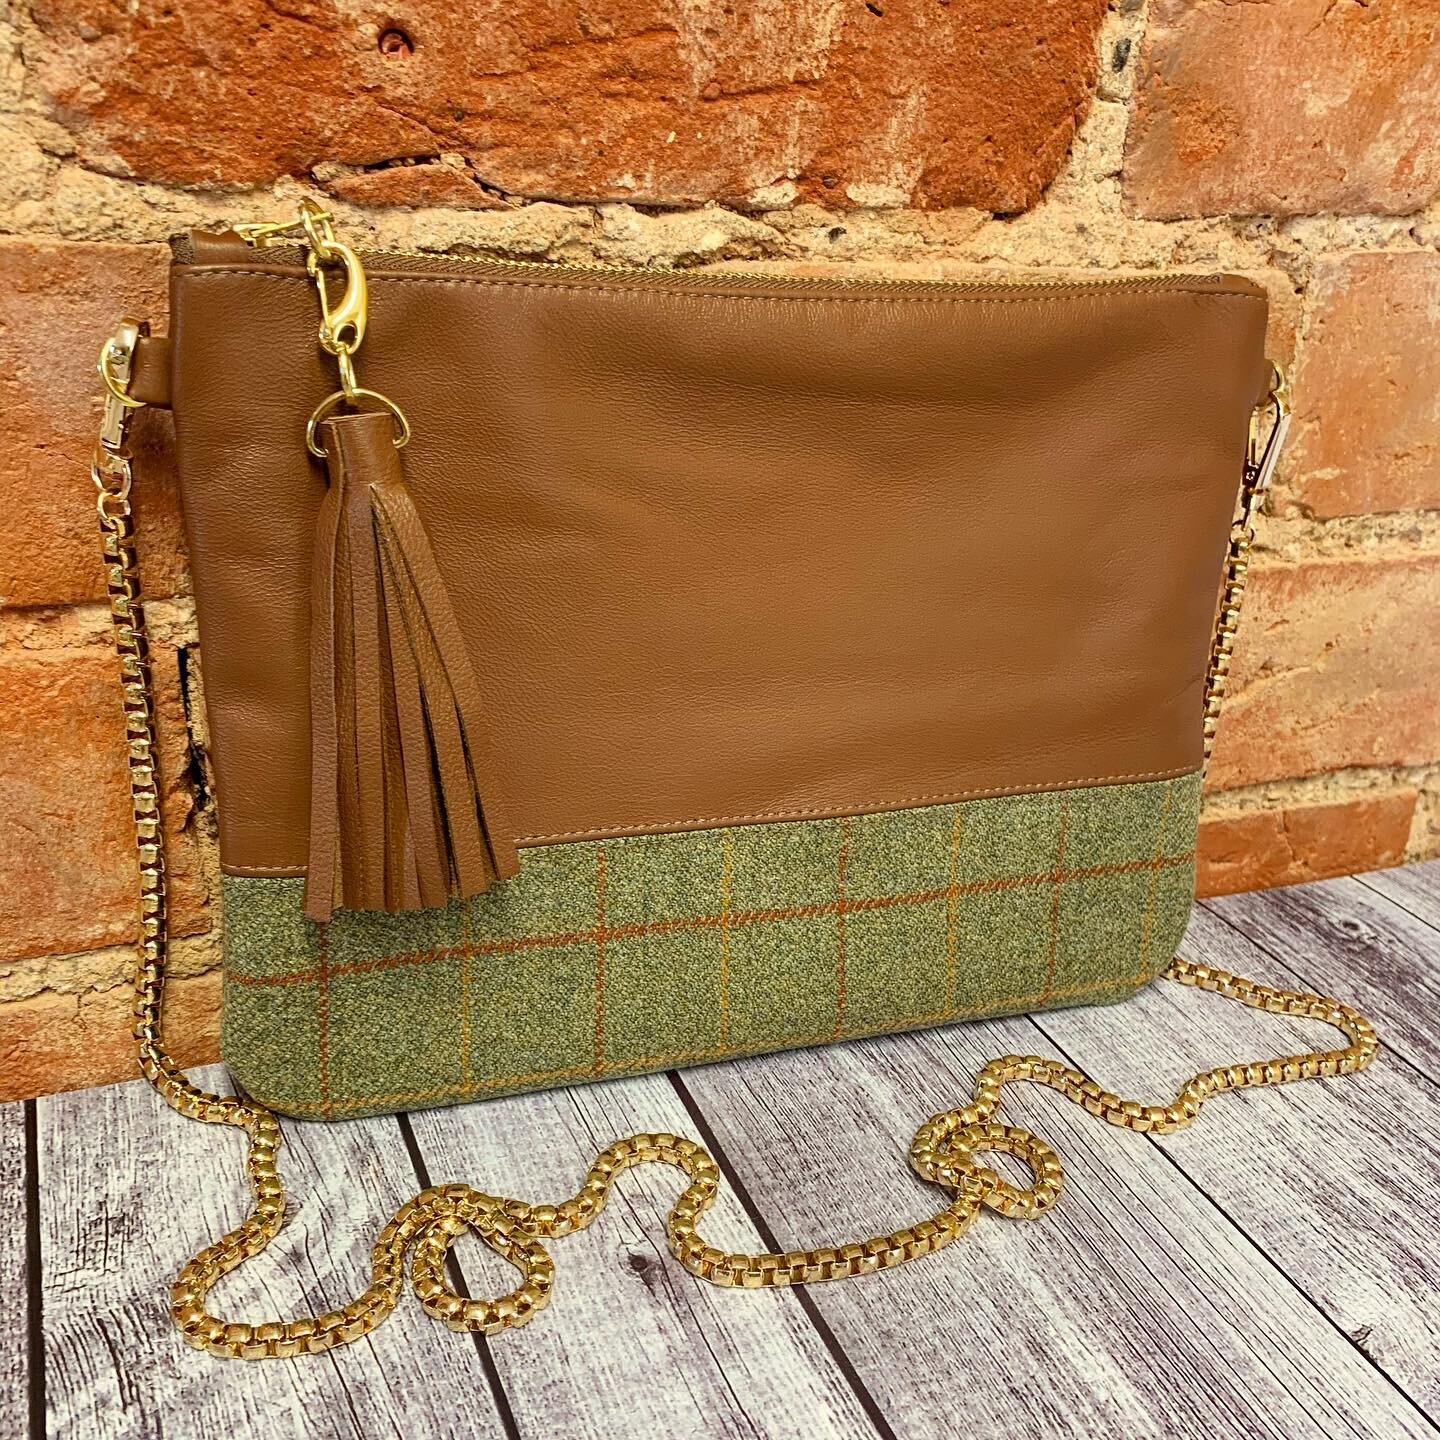 Tan leather and green with matching checked tweed clutch available on our website! www.jjrbespoke.com 
Comes with detachable shoulder chain and leather tassel, all finished off with gold hardware! 💚🤎